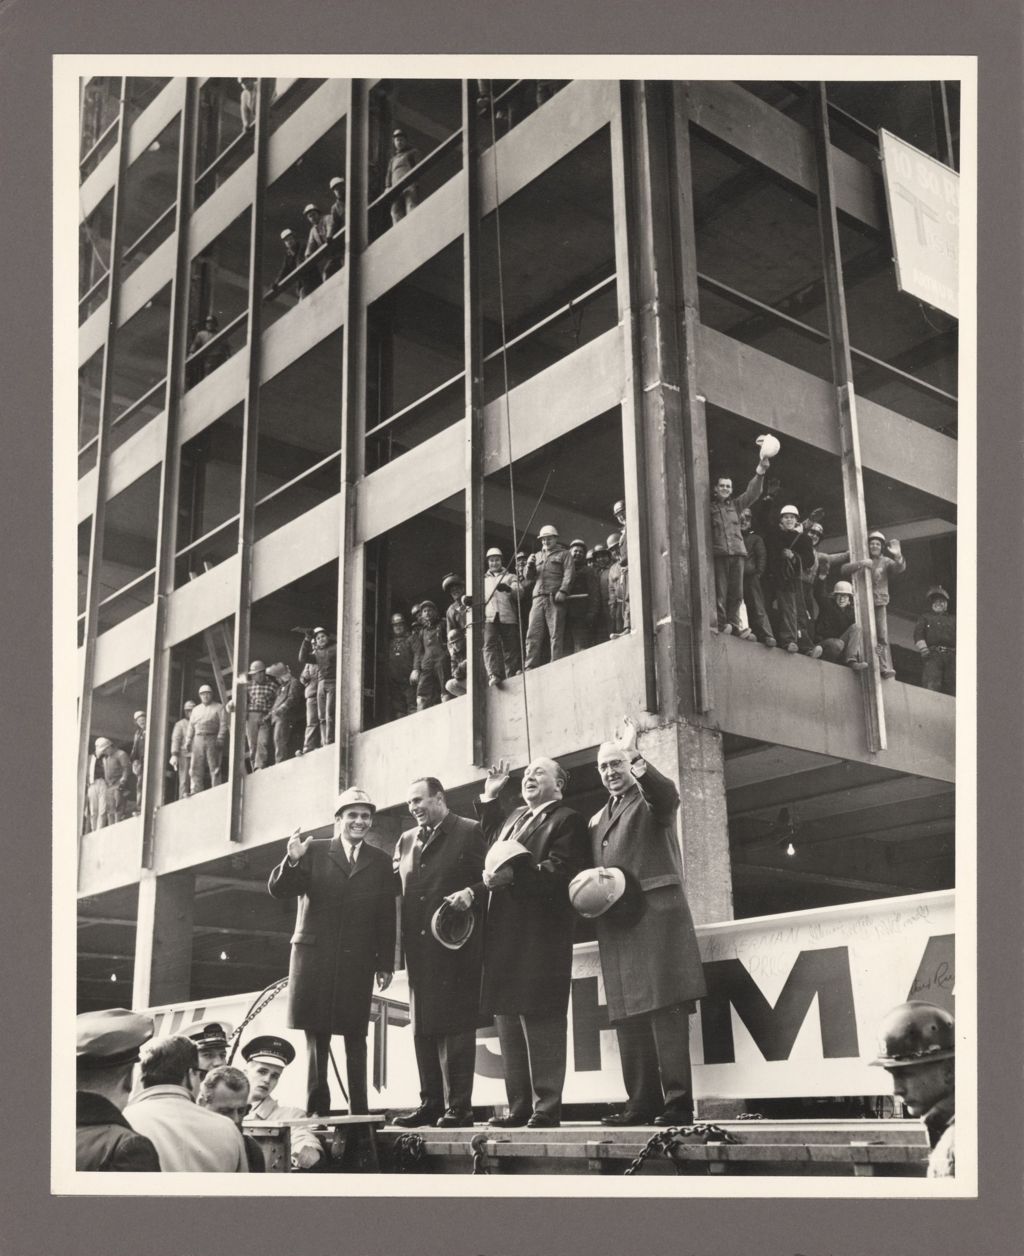 Miniature of Richard J. Daley at a building construction site event